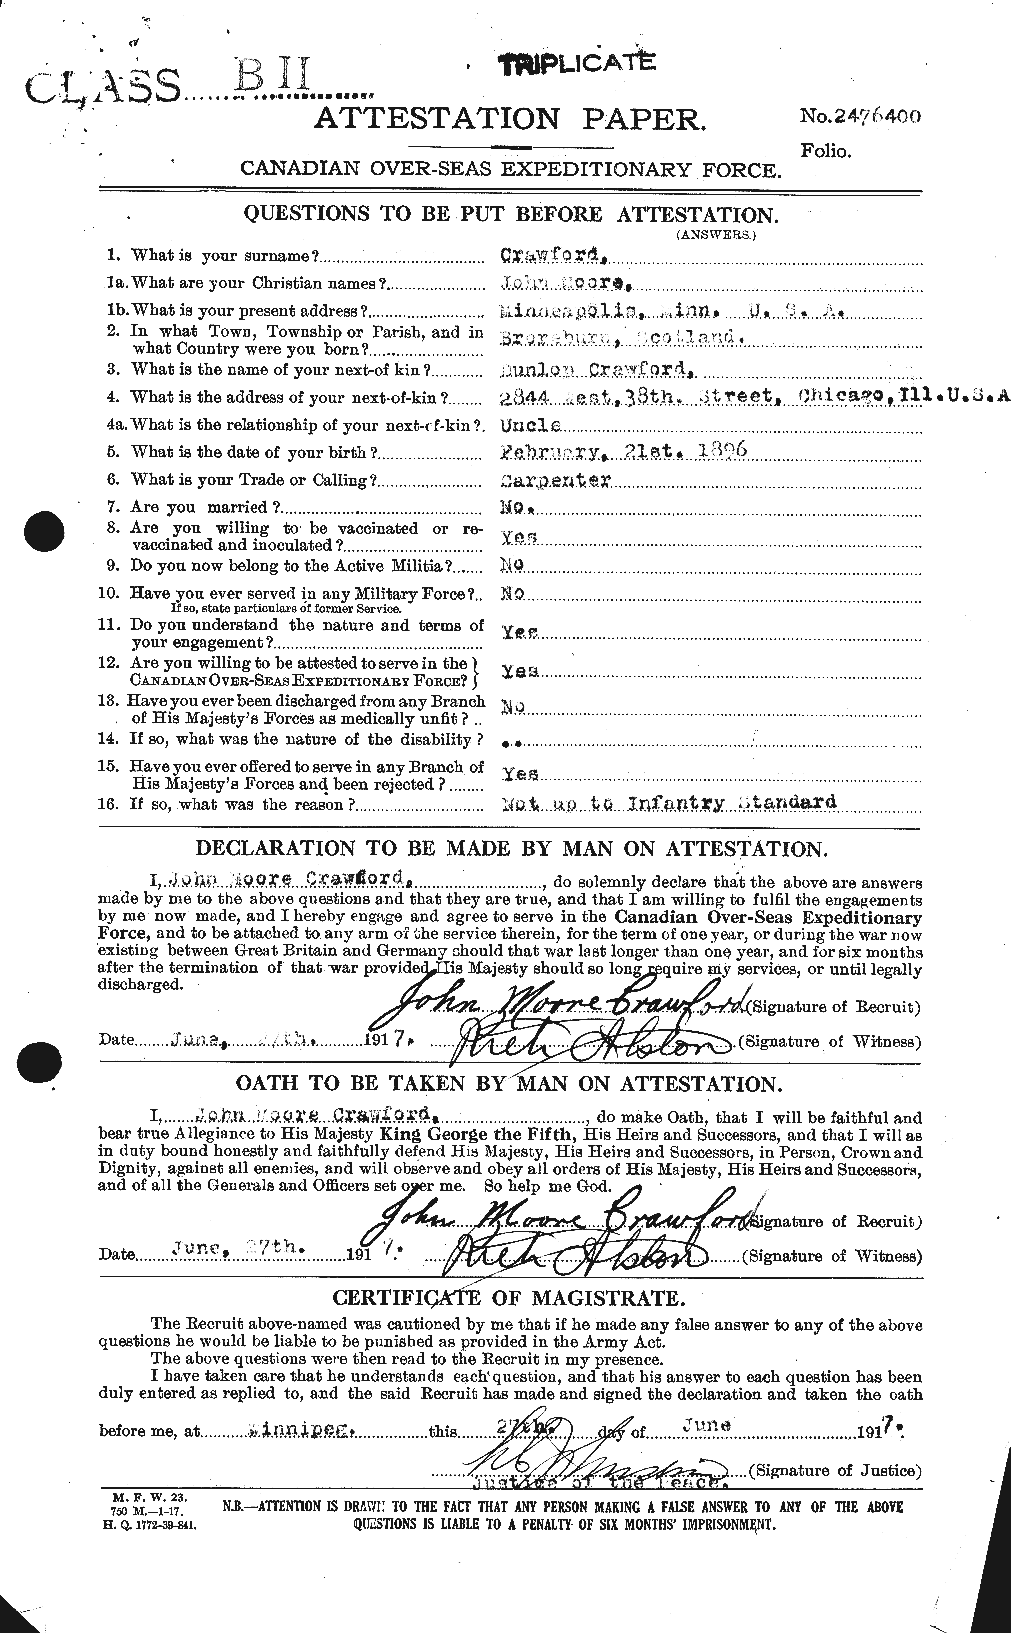 Personnel Records of the First World War - CEF 061826a